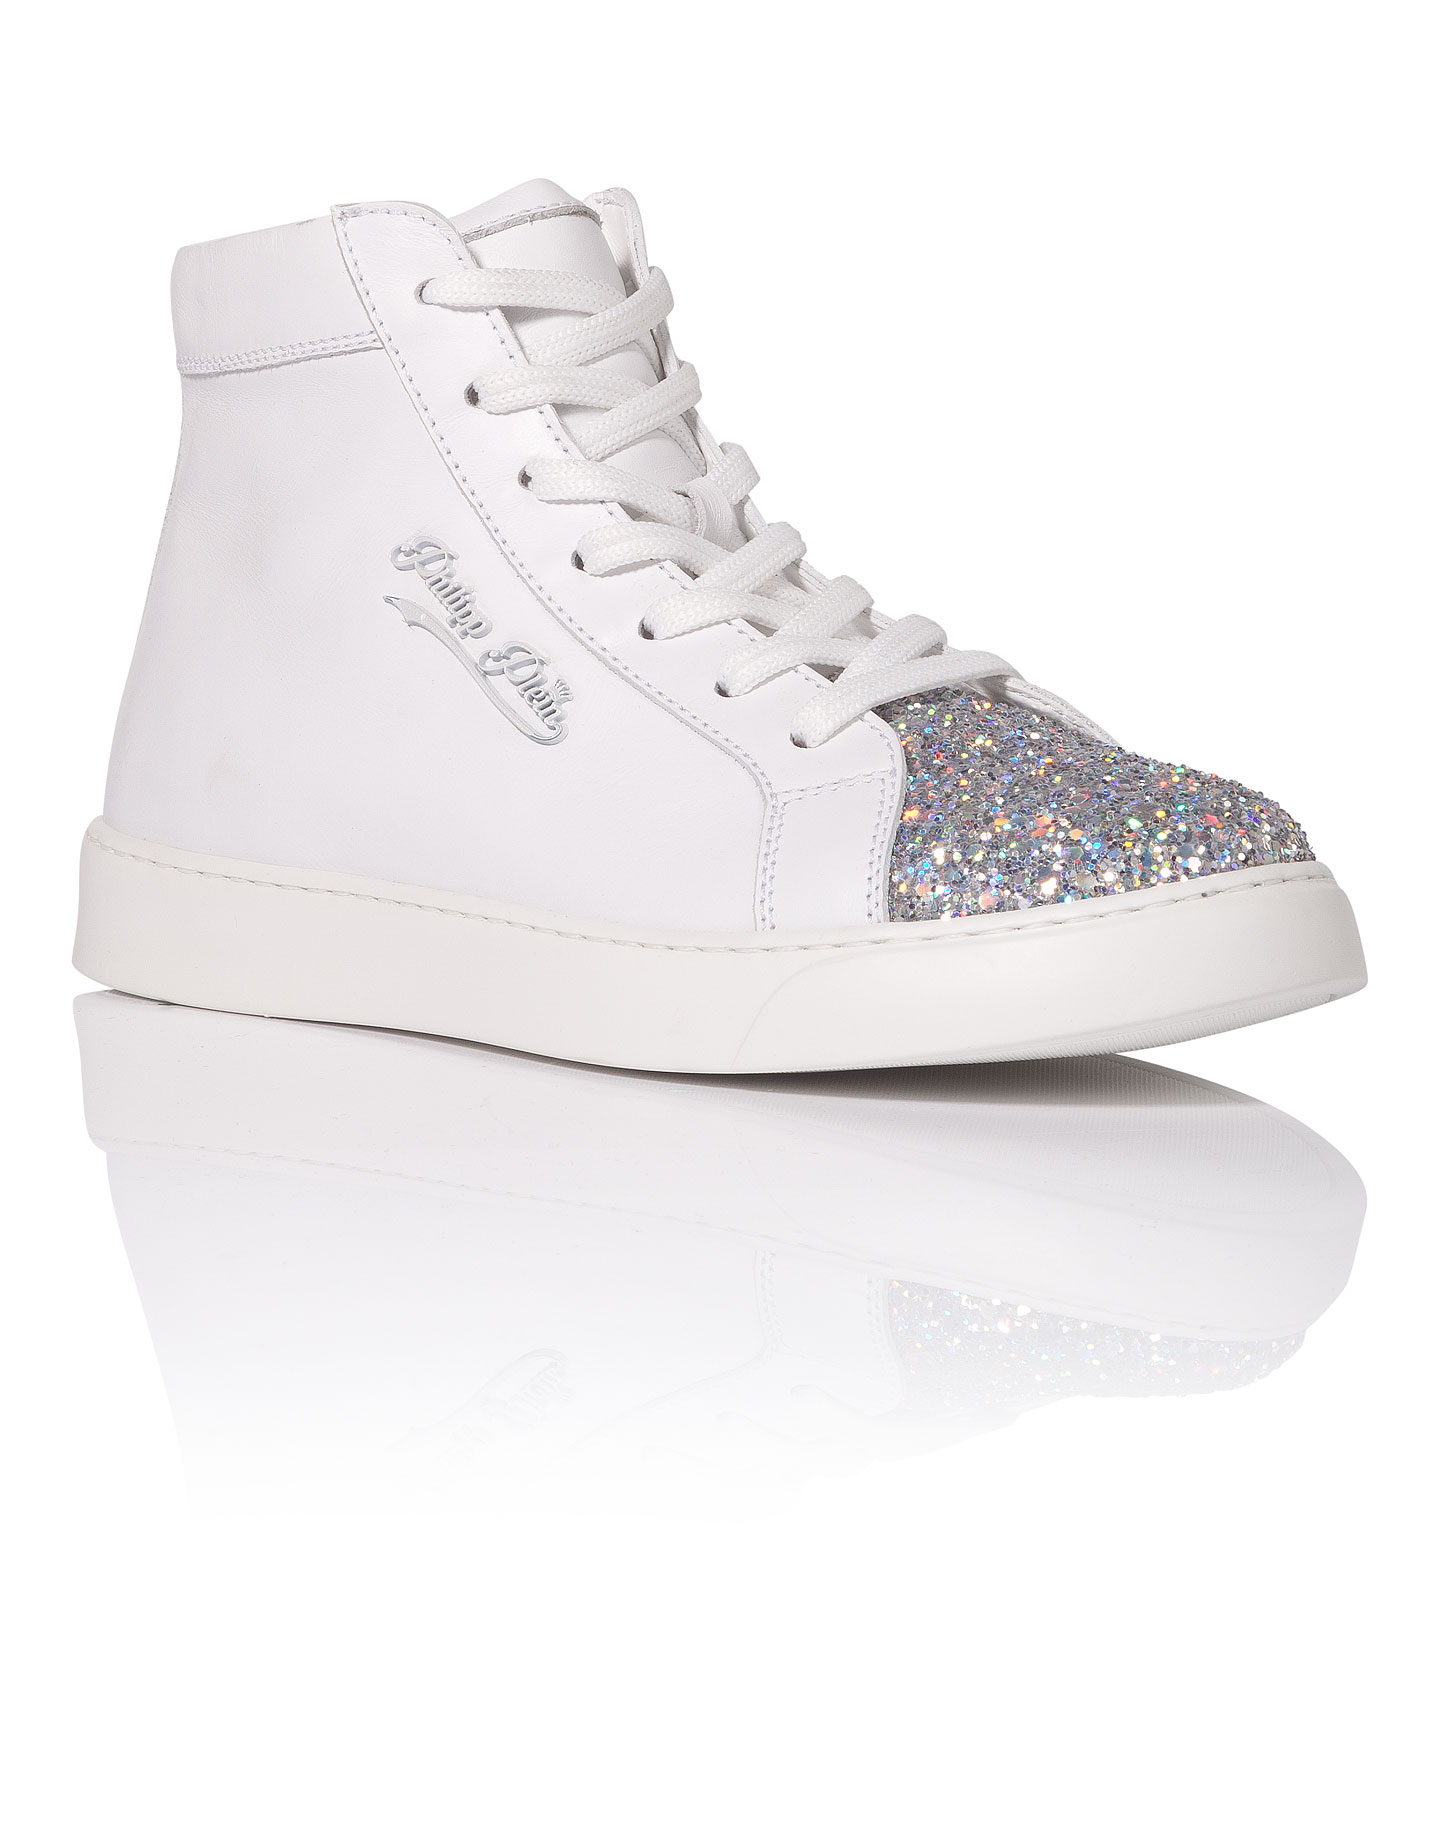 Mid-Top Sneakers "Tusket" | Philipp Plein Outlet